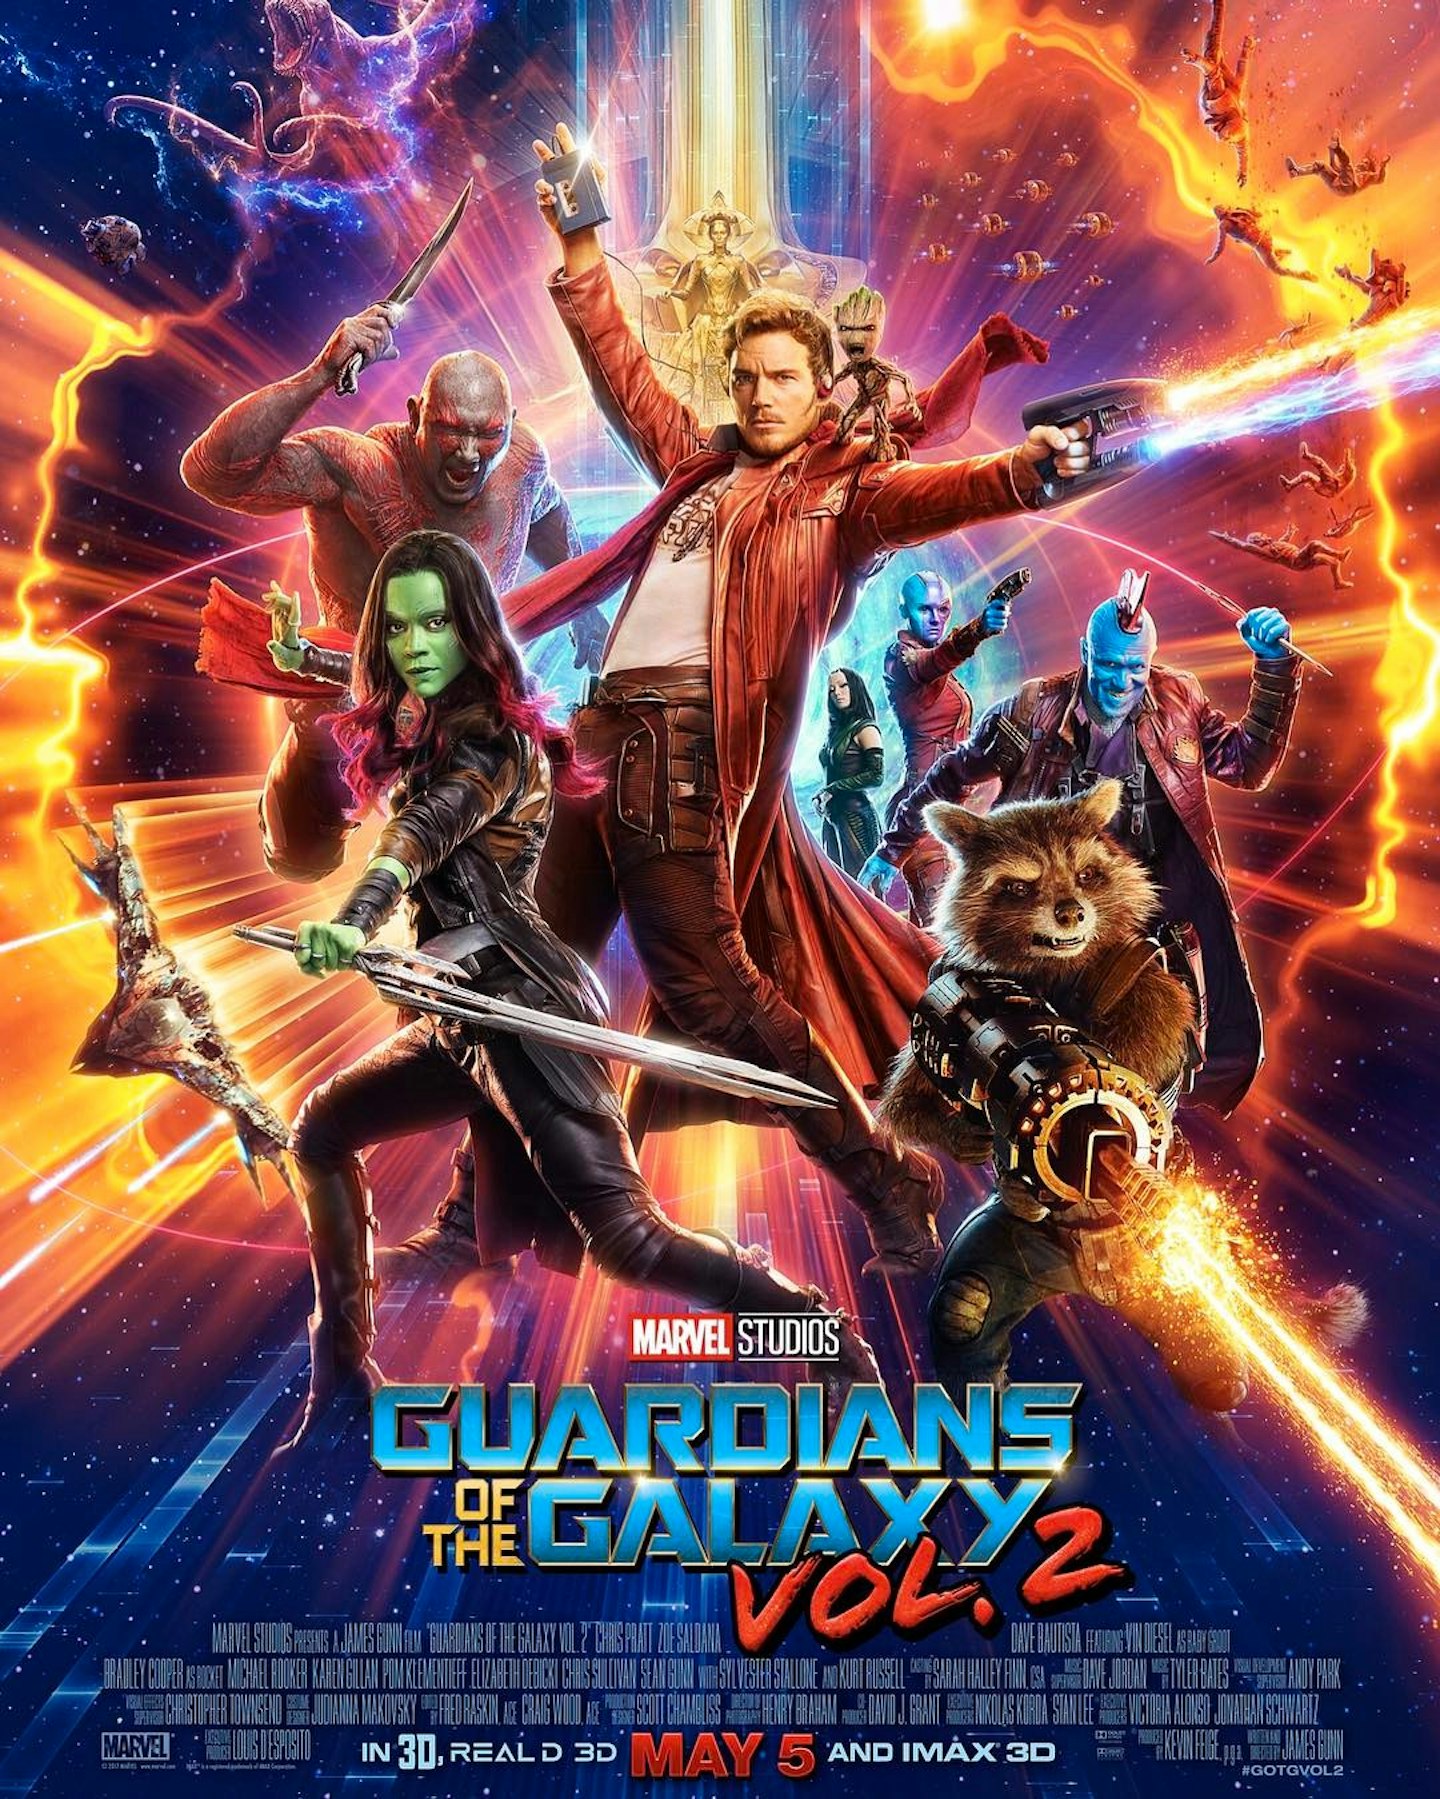 Guardians Of The Galaxy Vol. 2 poster